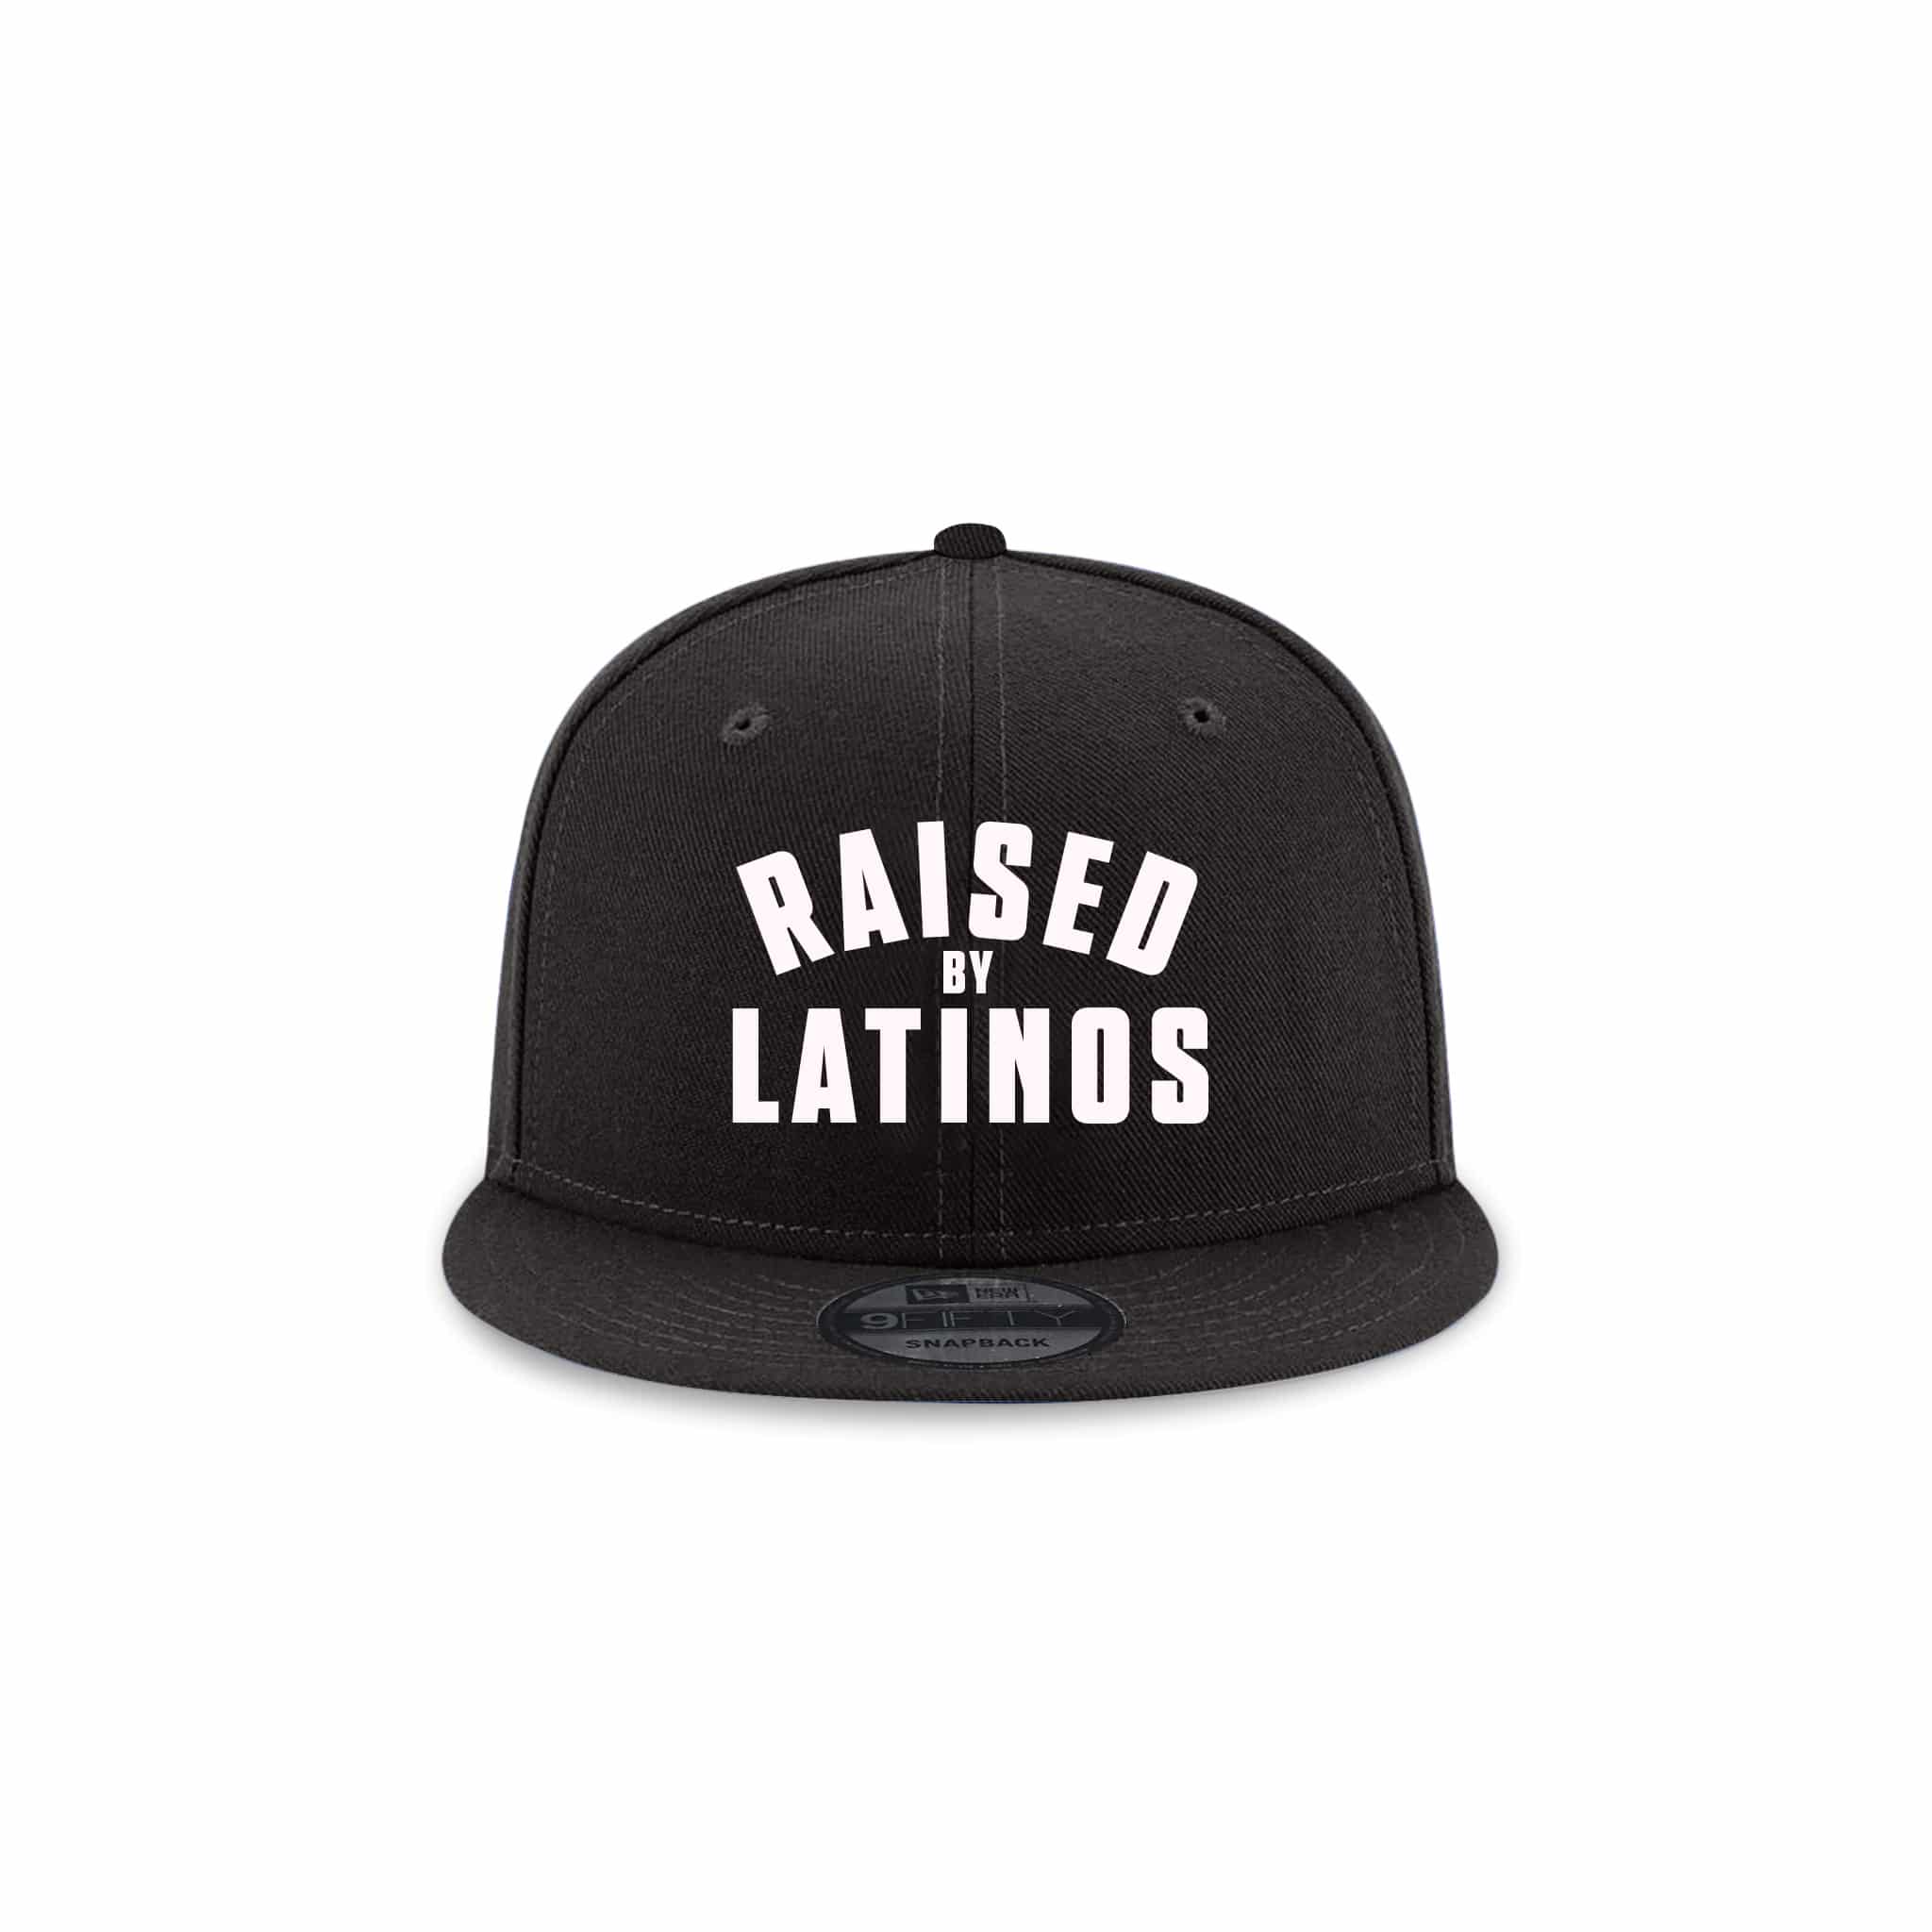 Cap　LATINOS　Wsup　BY　Rbl　RAISED